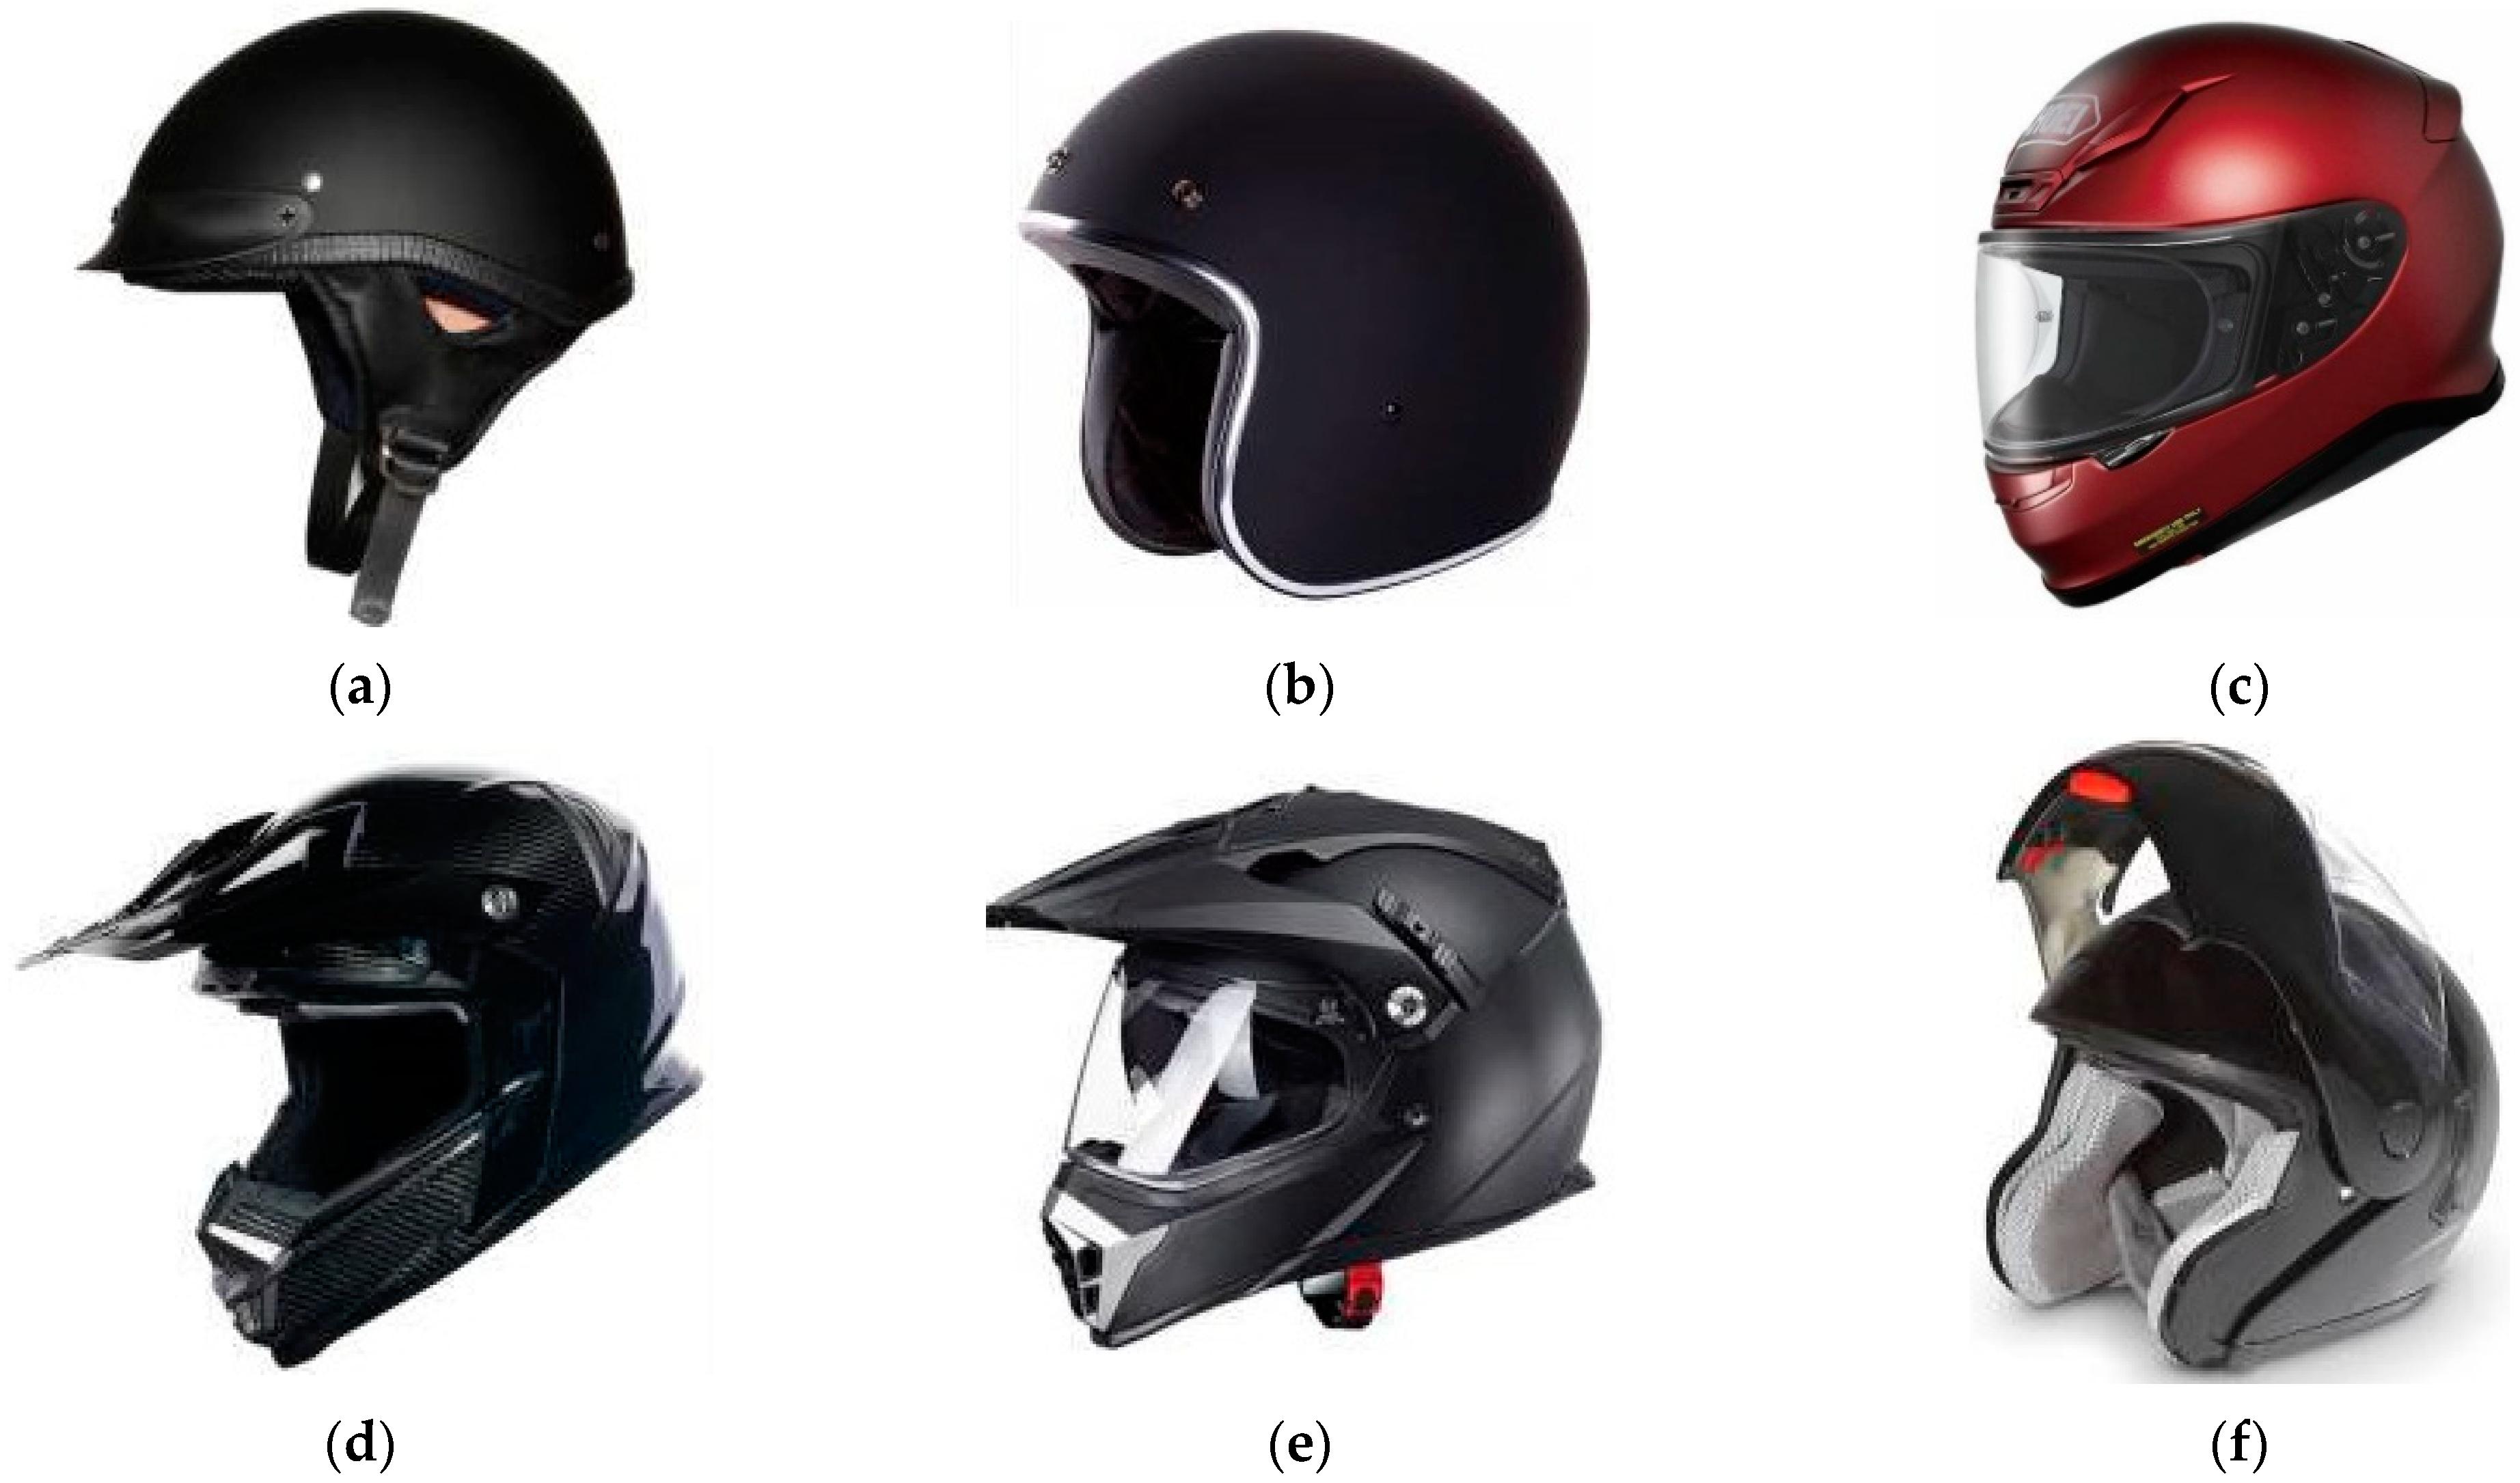 IJERPH | Free Full-Text | Impact of Helmet-Wearing Policy on E-Bike Safety  Riding Behavior: A Bivariate Ordered Probit Analysis in Ningbo, China